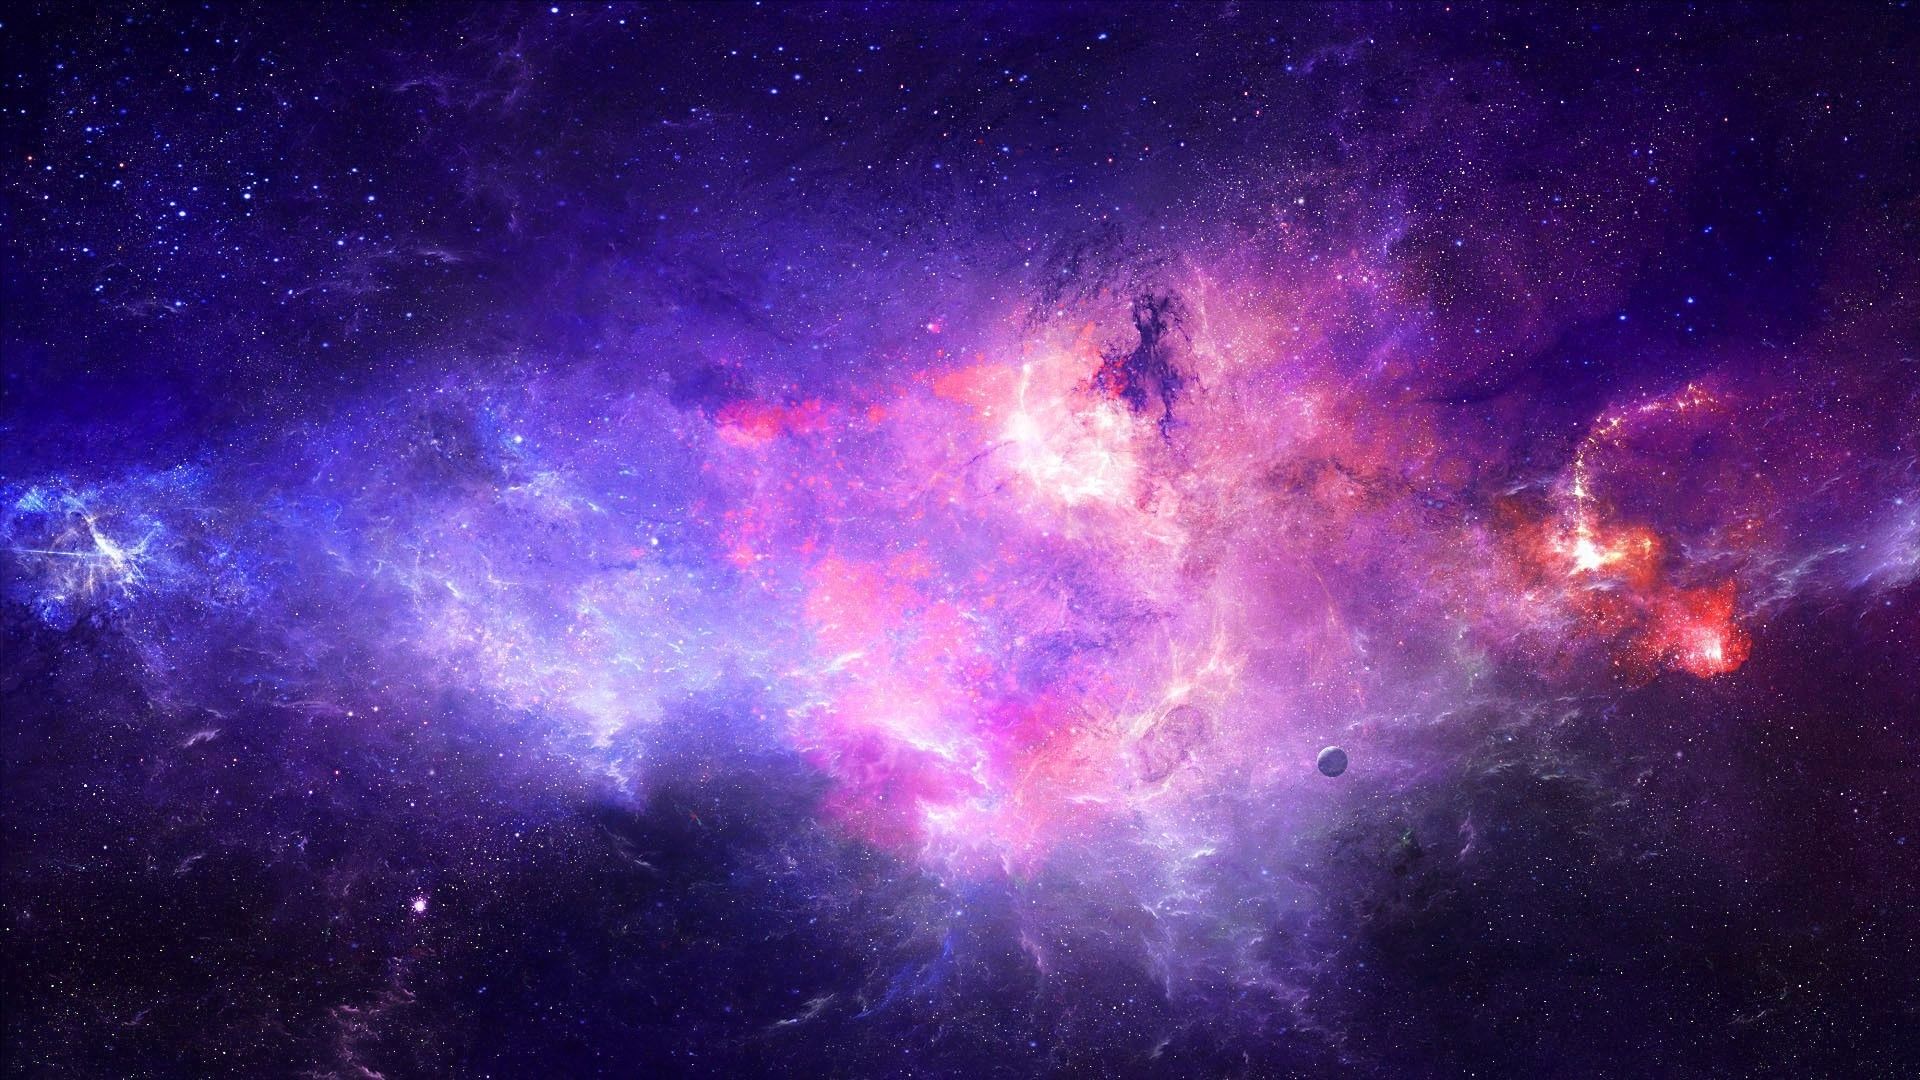 Wallpapers Roblox Galaxy Backgrounds Wallpapers Roblox Arsenal : Best Roblox Games The Top Roblox Creations To Play Right Now Techradar / We hope you enjoy our growing.